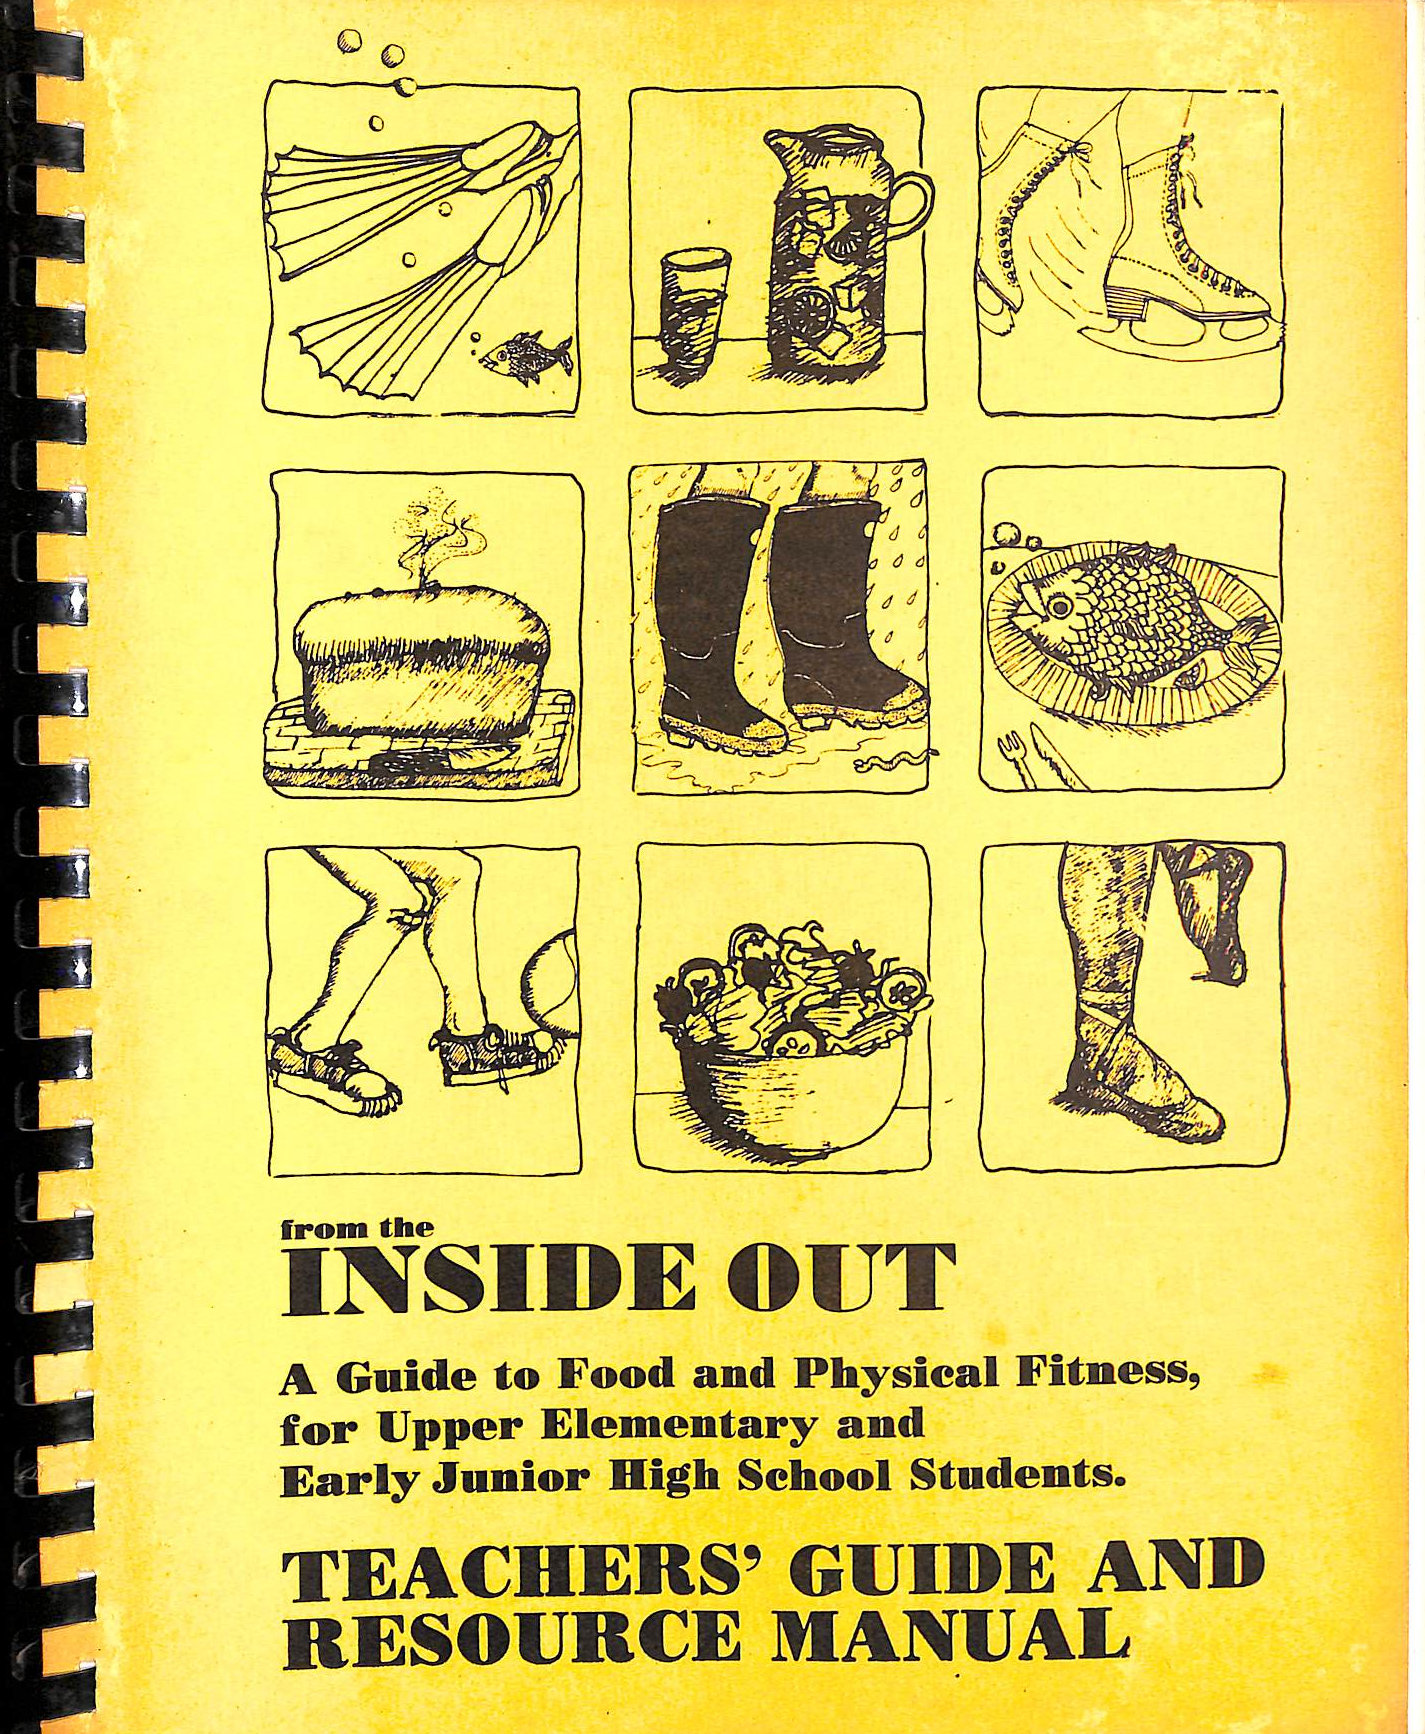 CAROL BERSHAD AND DEBORAH BERNICK - From the Inside Out: A Guide to Food and Physical Fitness for Upper Elementary and Early Junior High School Students: Teachers Guide and resurce Manual